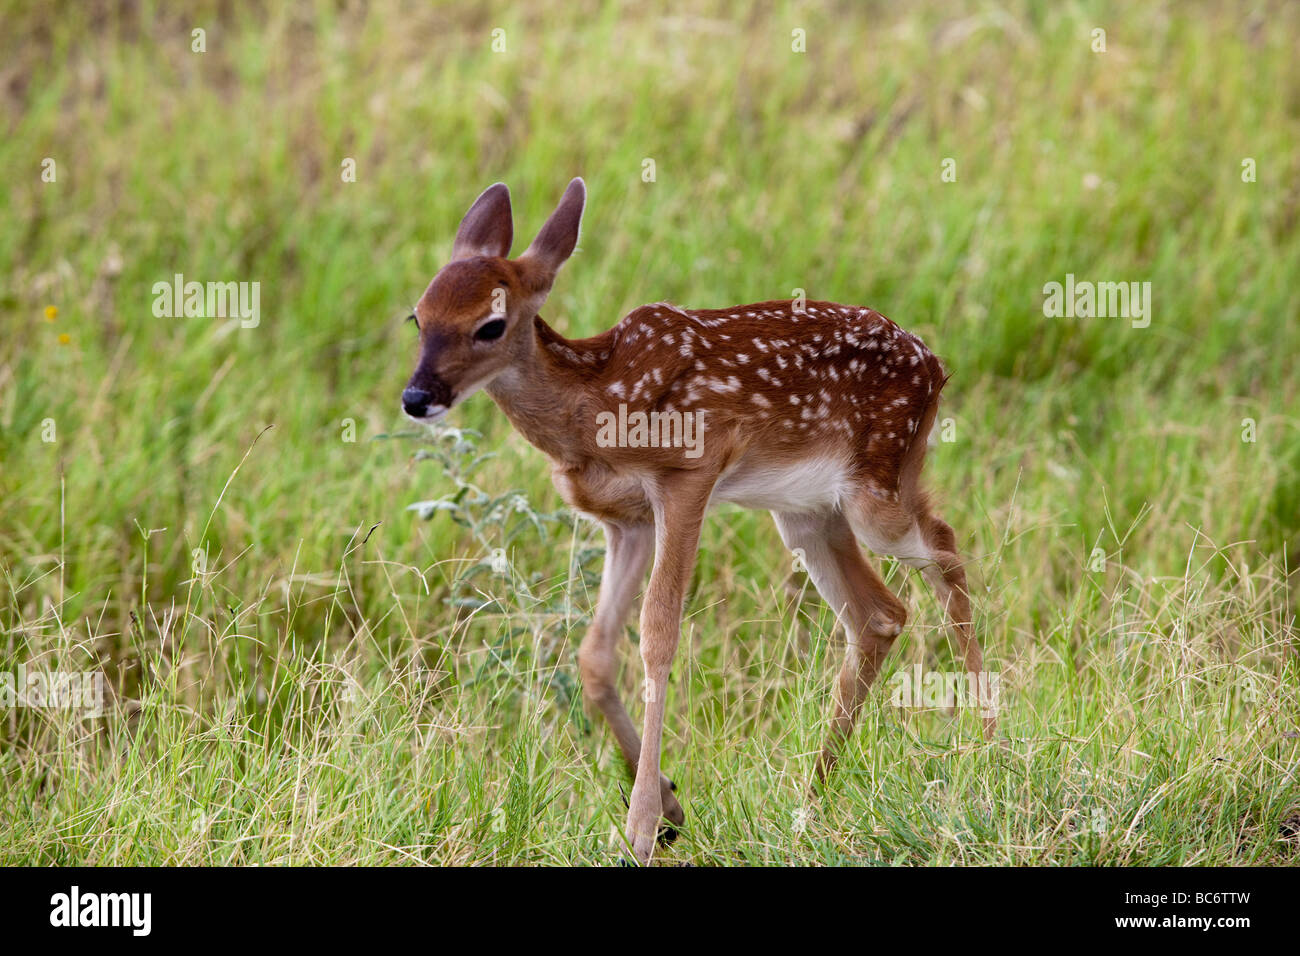 A fawn White-tailed Deer, Odocoileus virginianus, native to the United States at Fossil Rim Wildlife Center, Texas Stock Photo